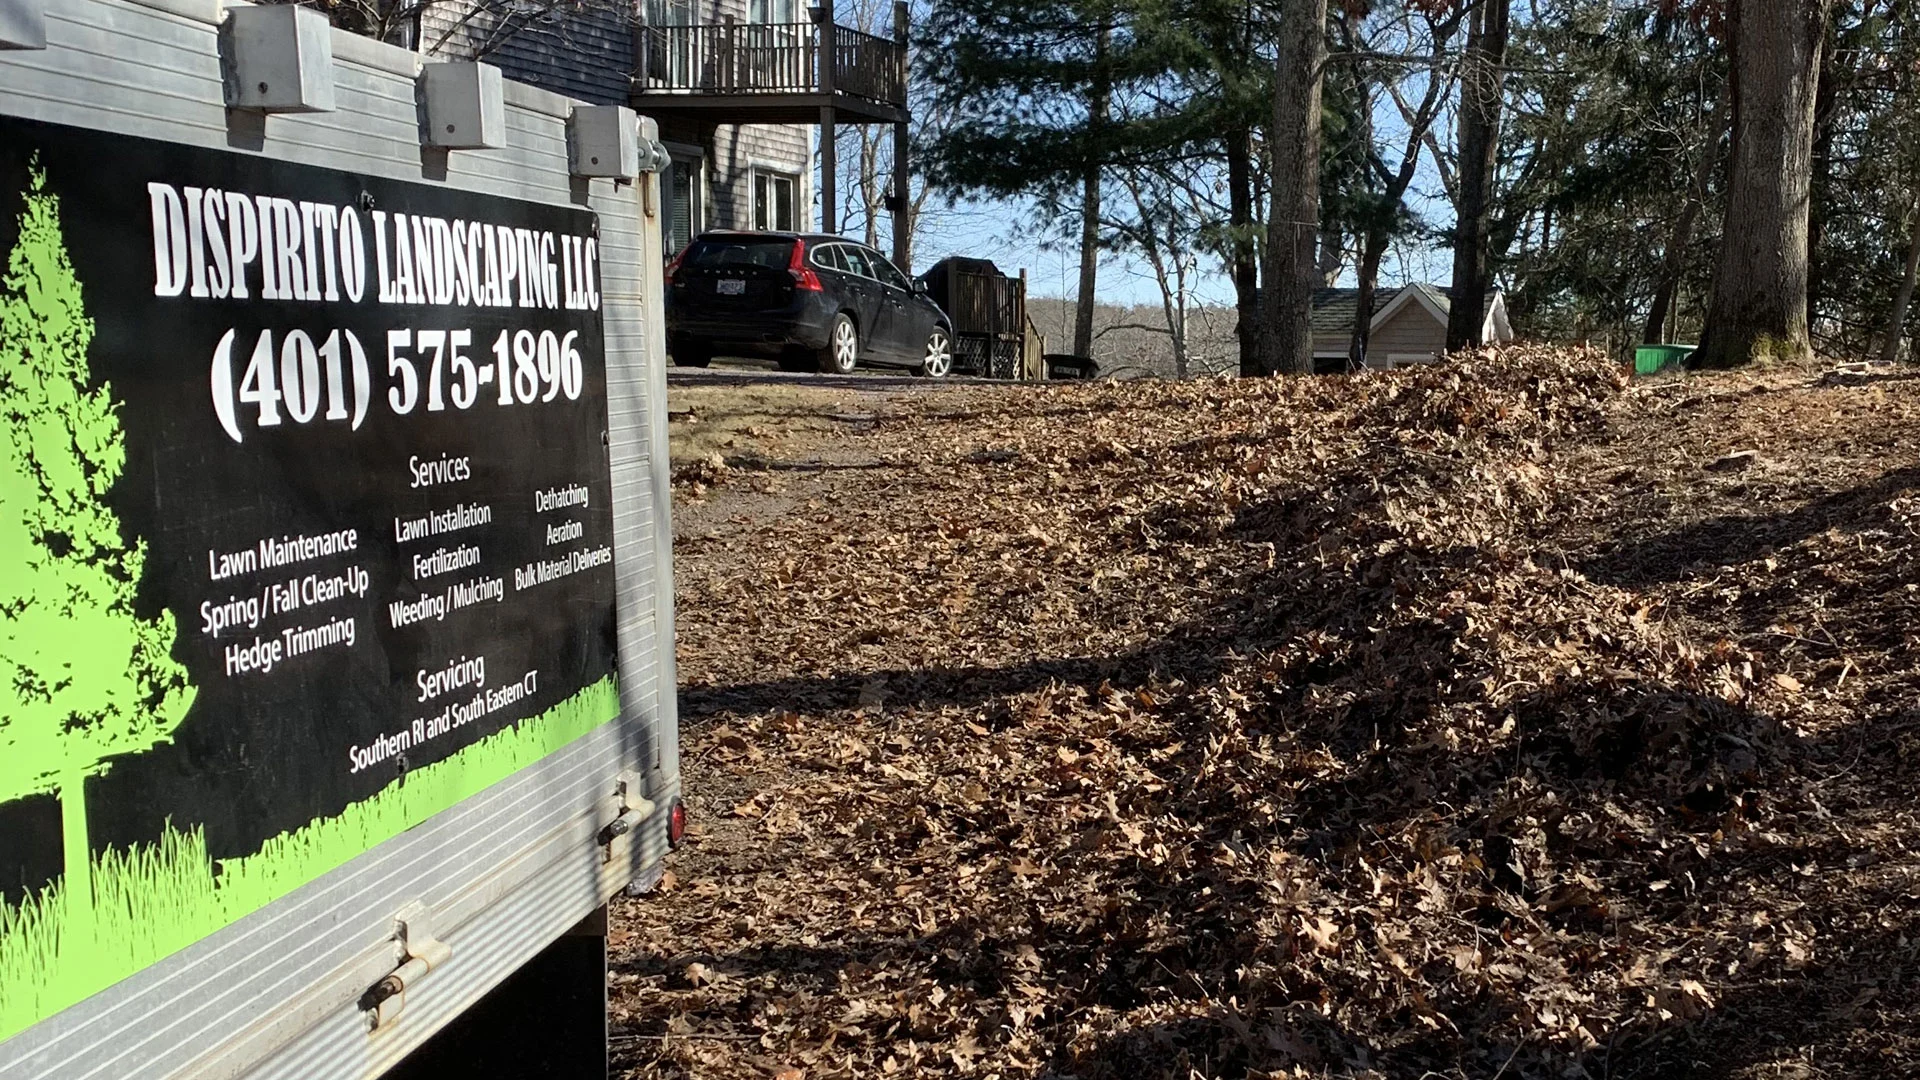 DiSpirito Landscaping LLC work trailer at a Westerly, RI home property.